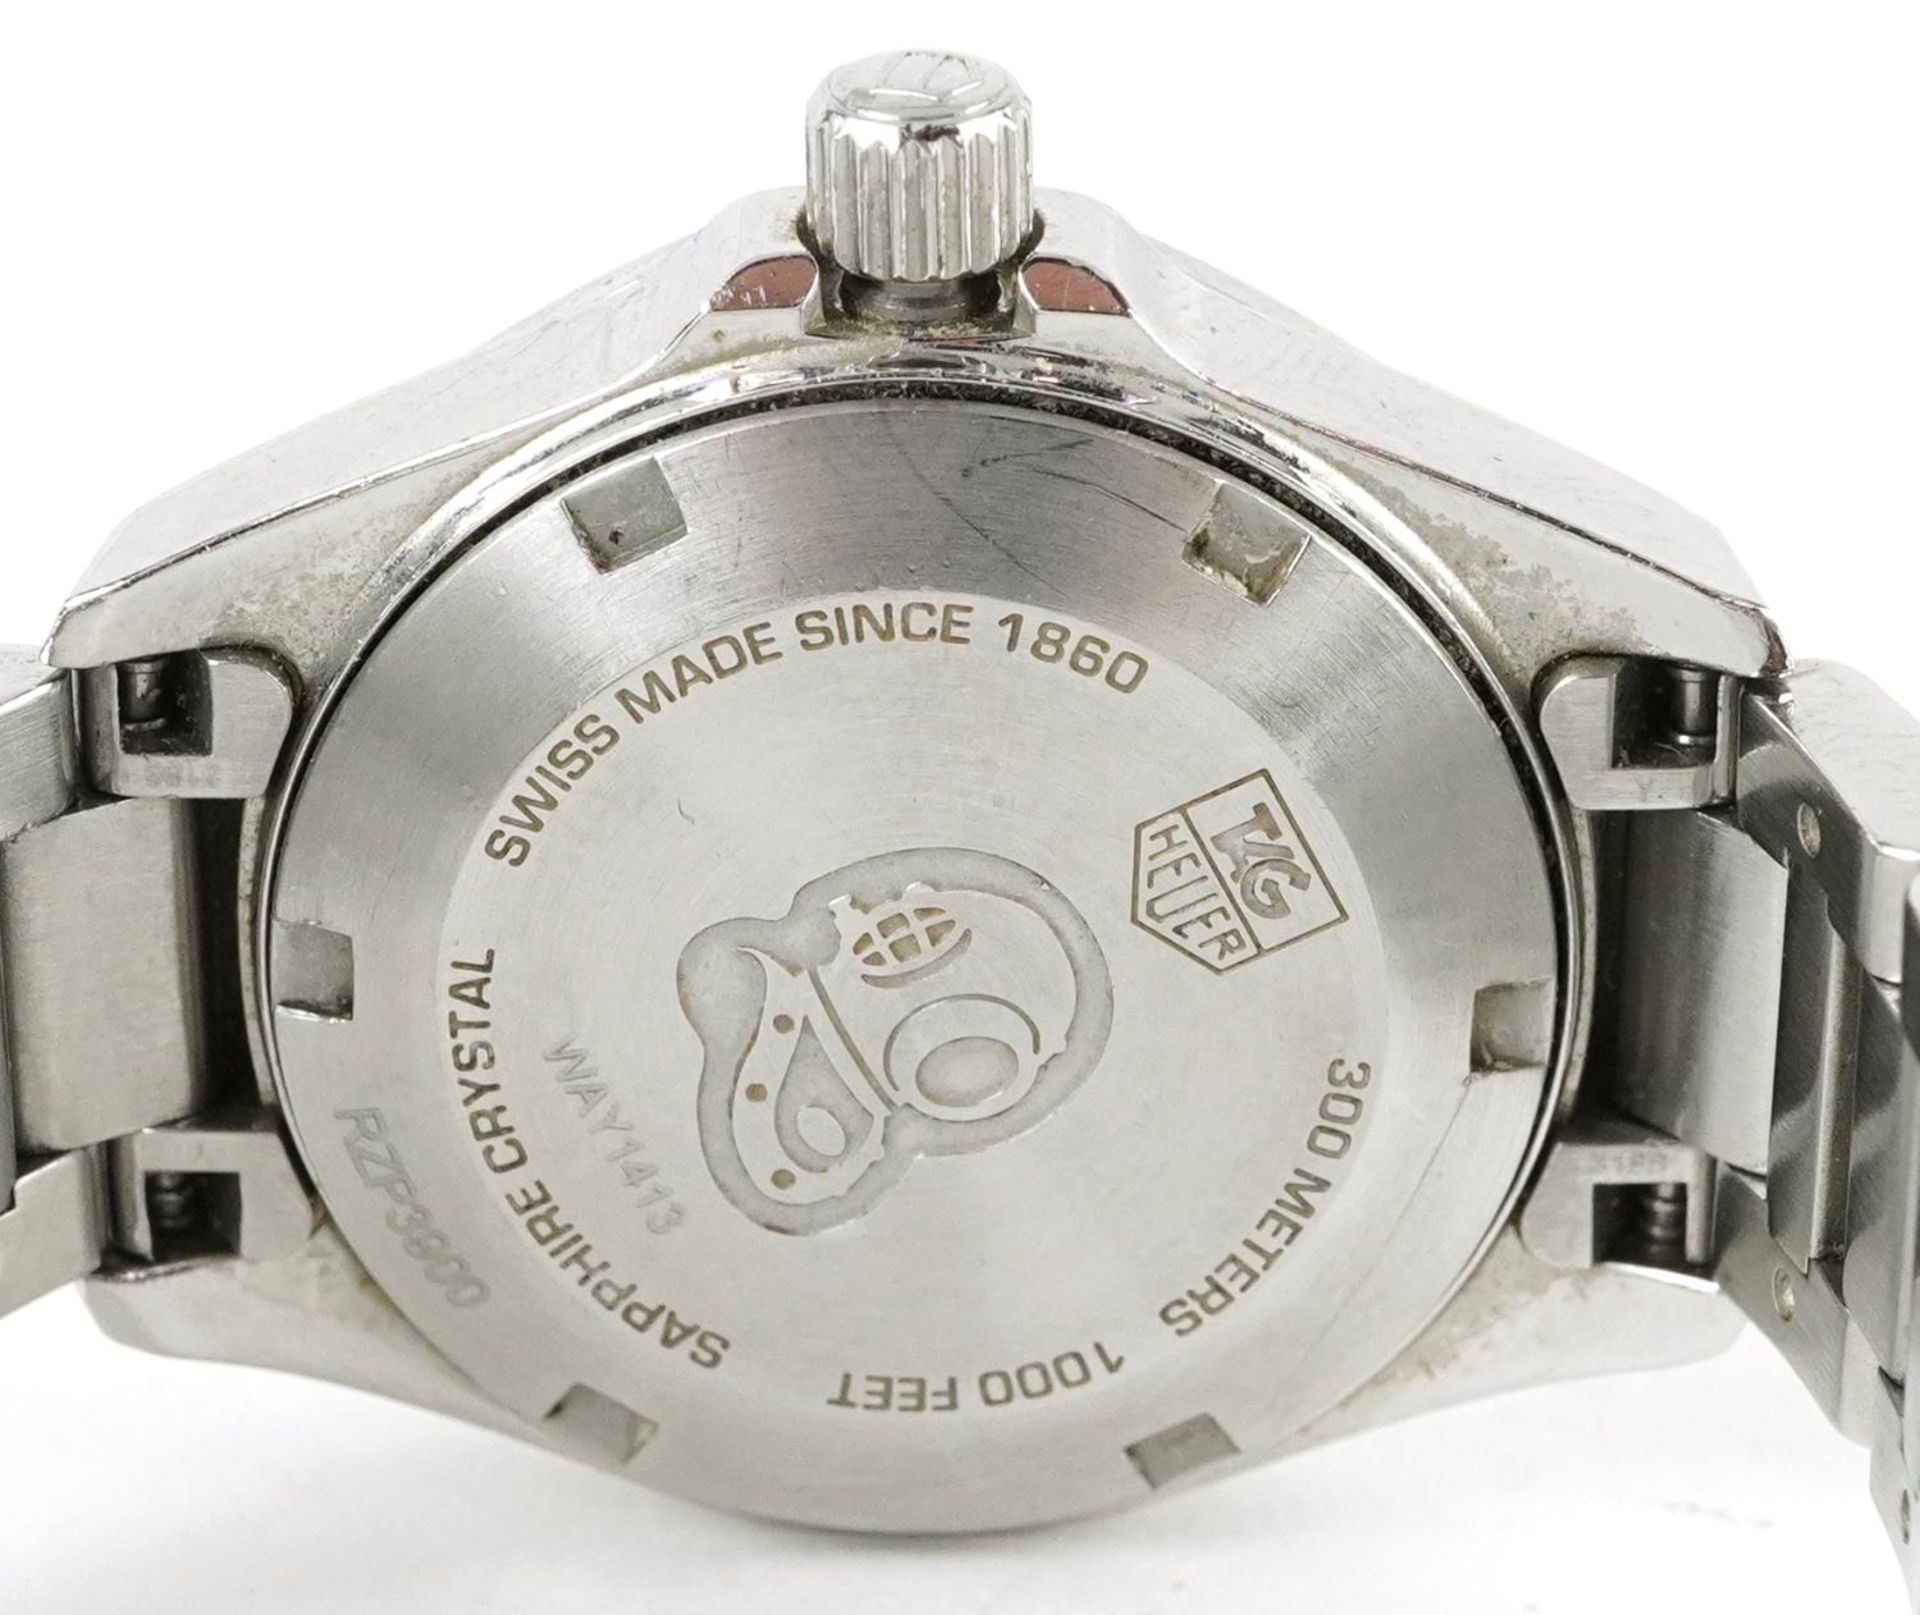 Tag Heuer, ladies Tag Heuer Aquaracer wristwatch having a diamond set mother of pearl dial with date - Image 4 of 9